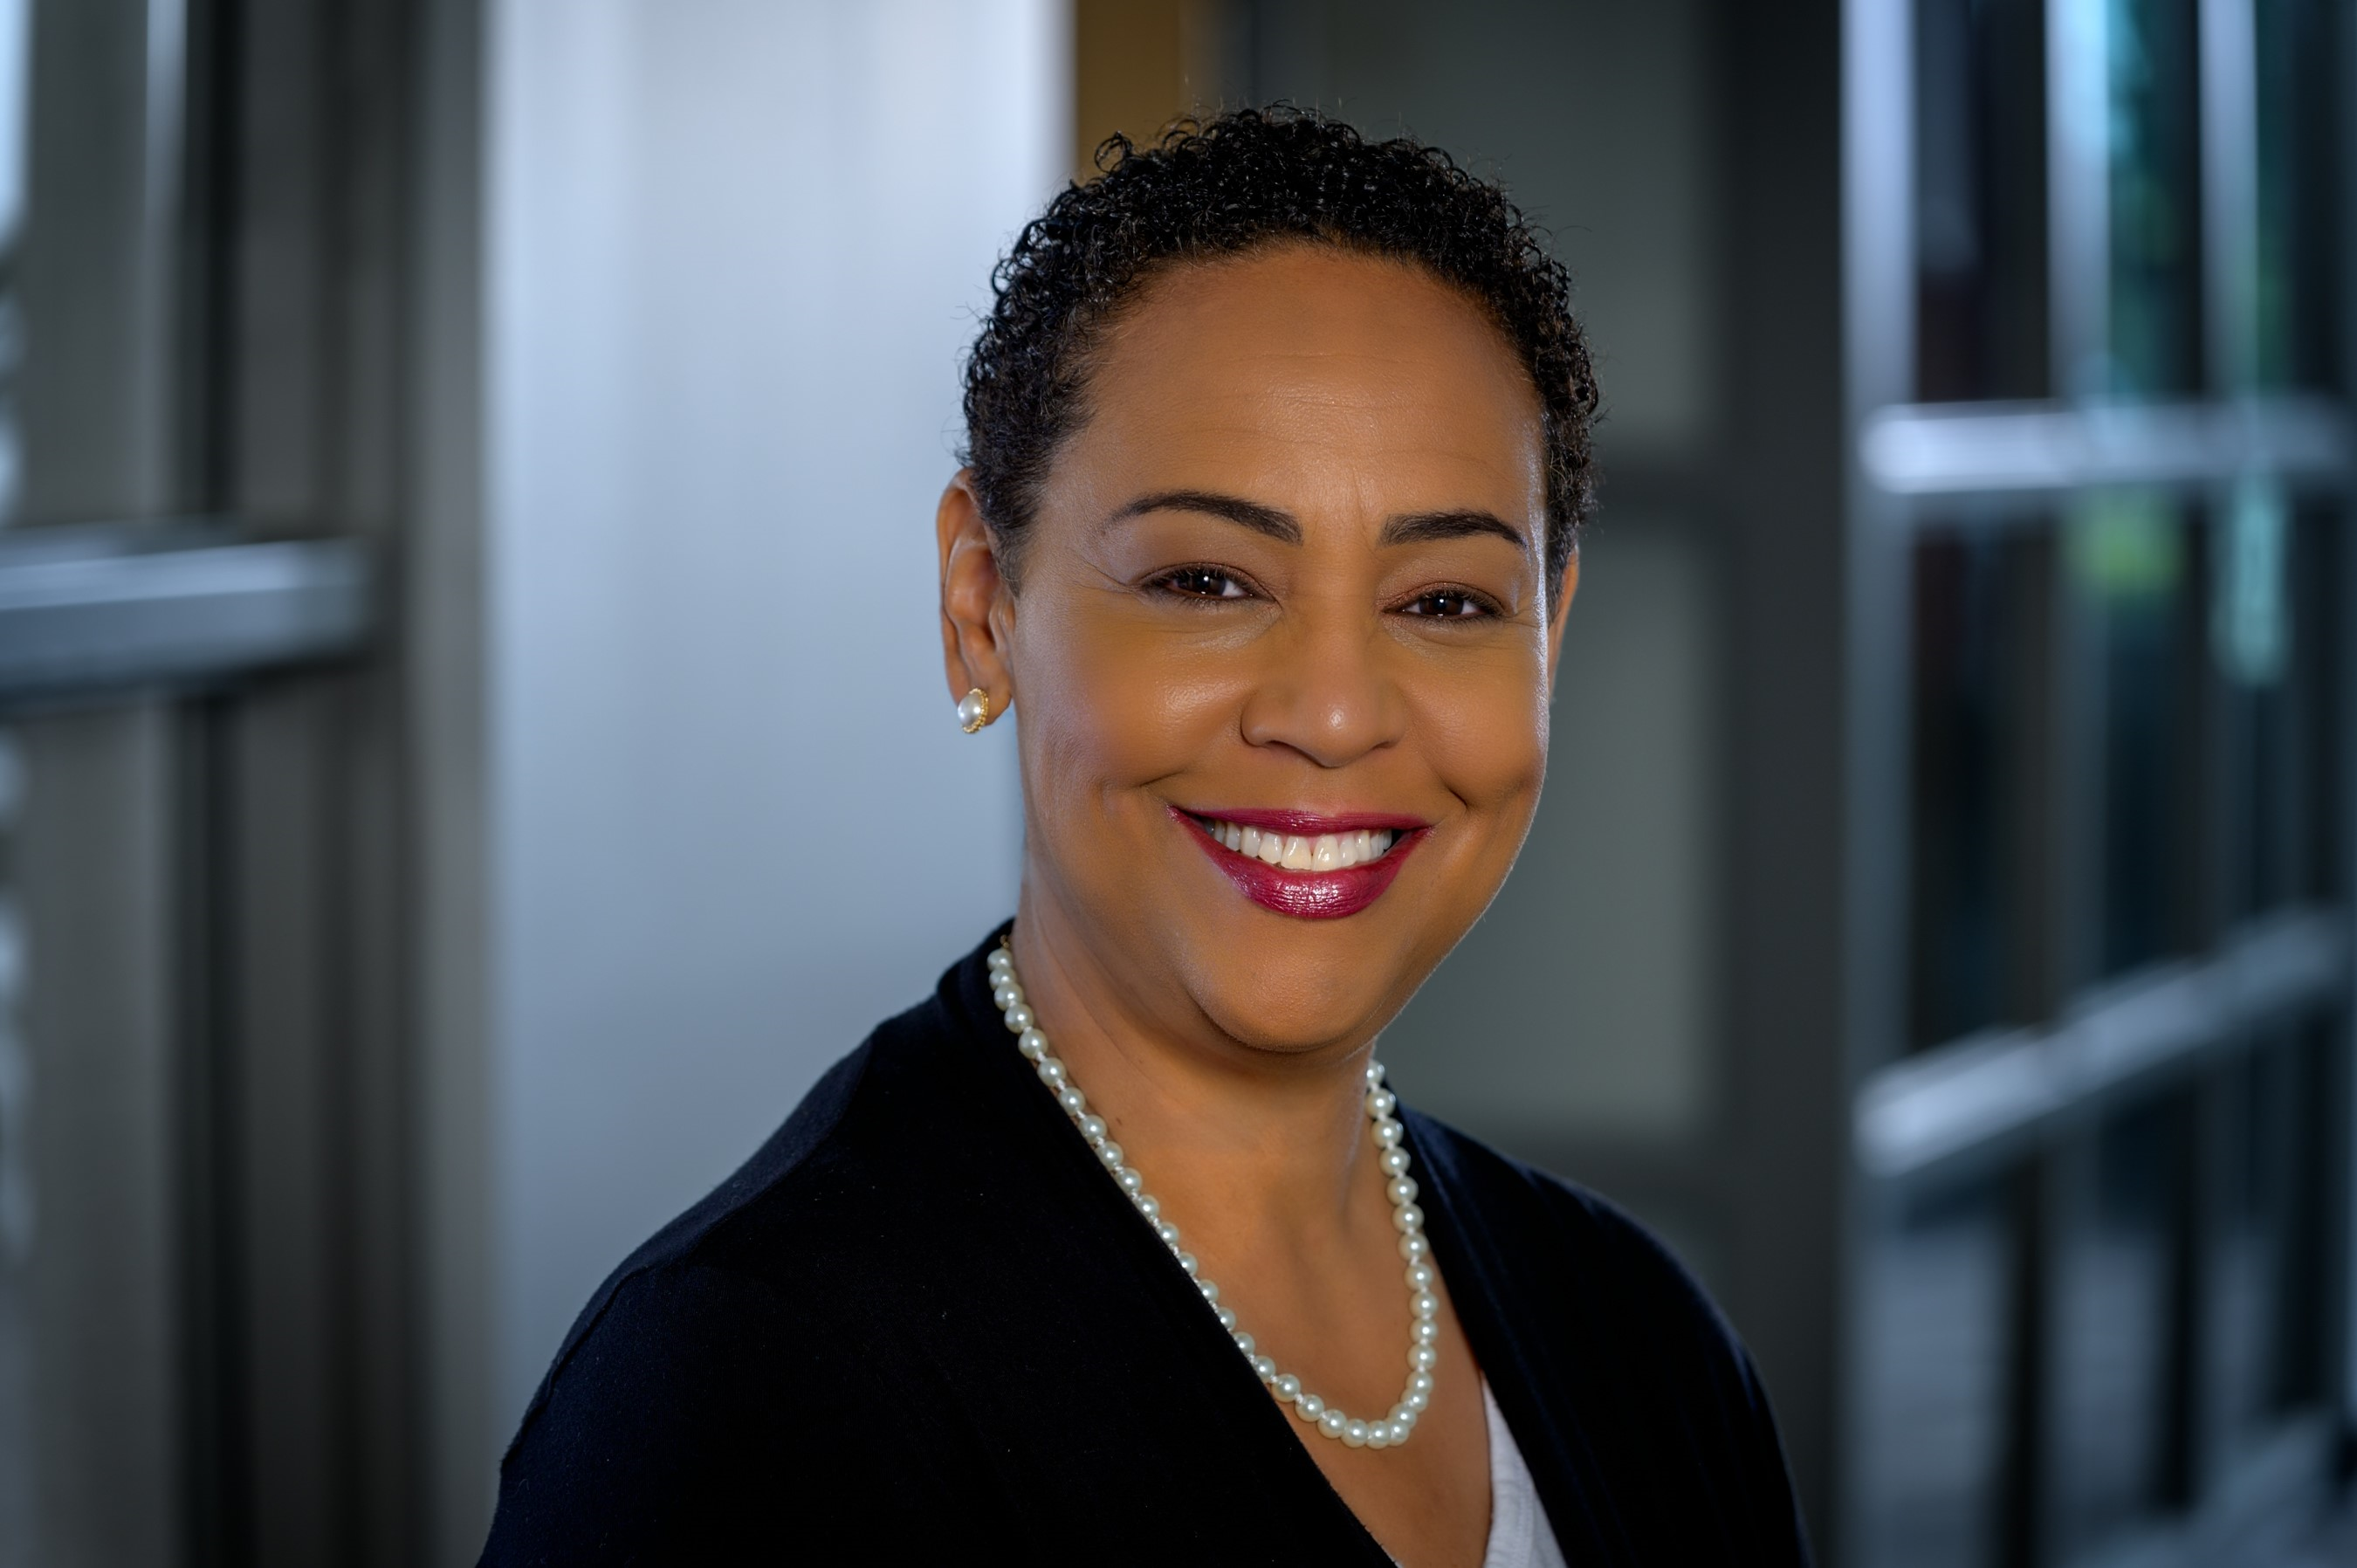 Shannon Dulin Named Senior Director of Community Impact for Comcast’s Central Division